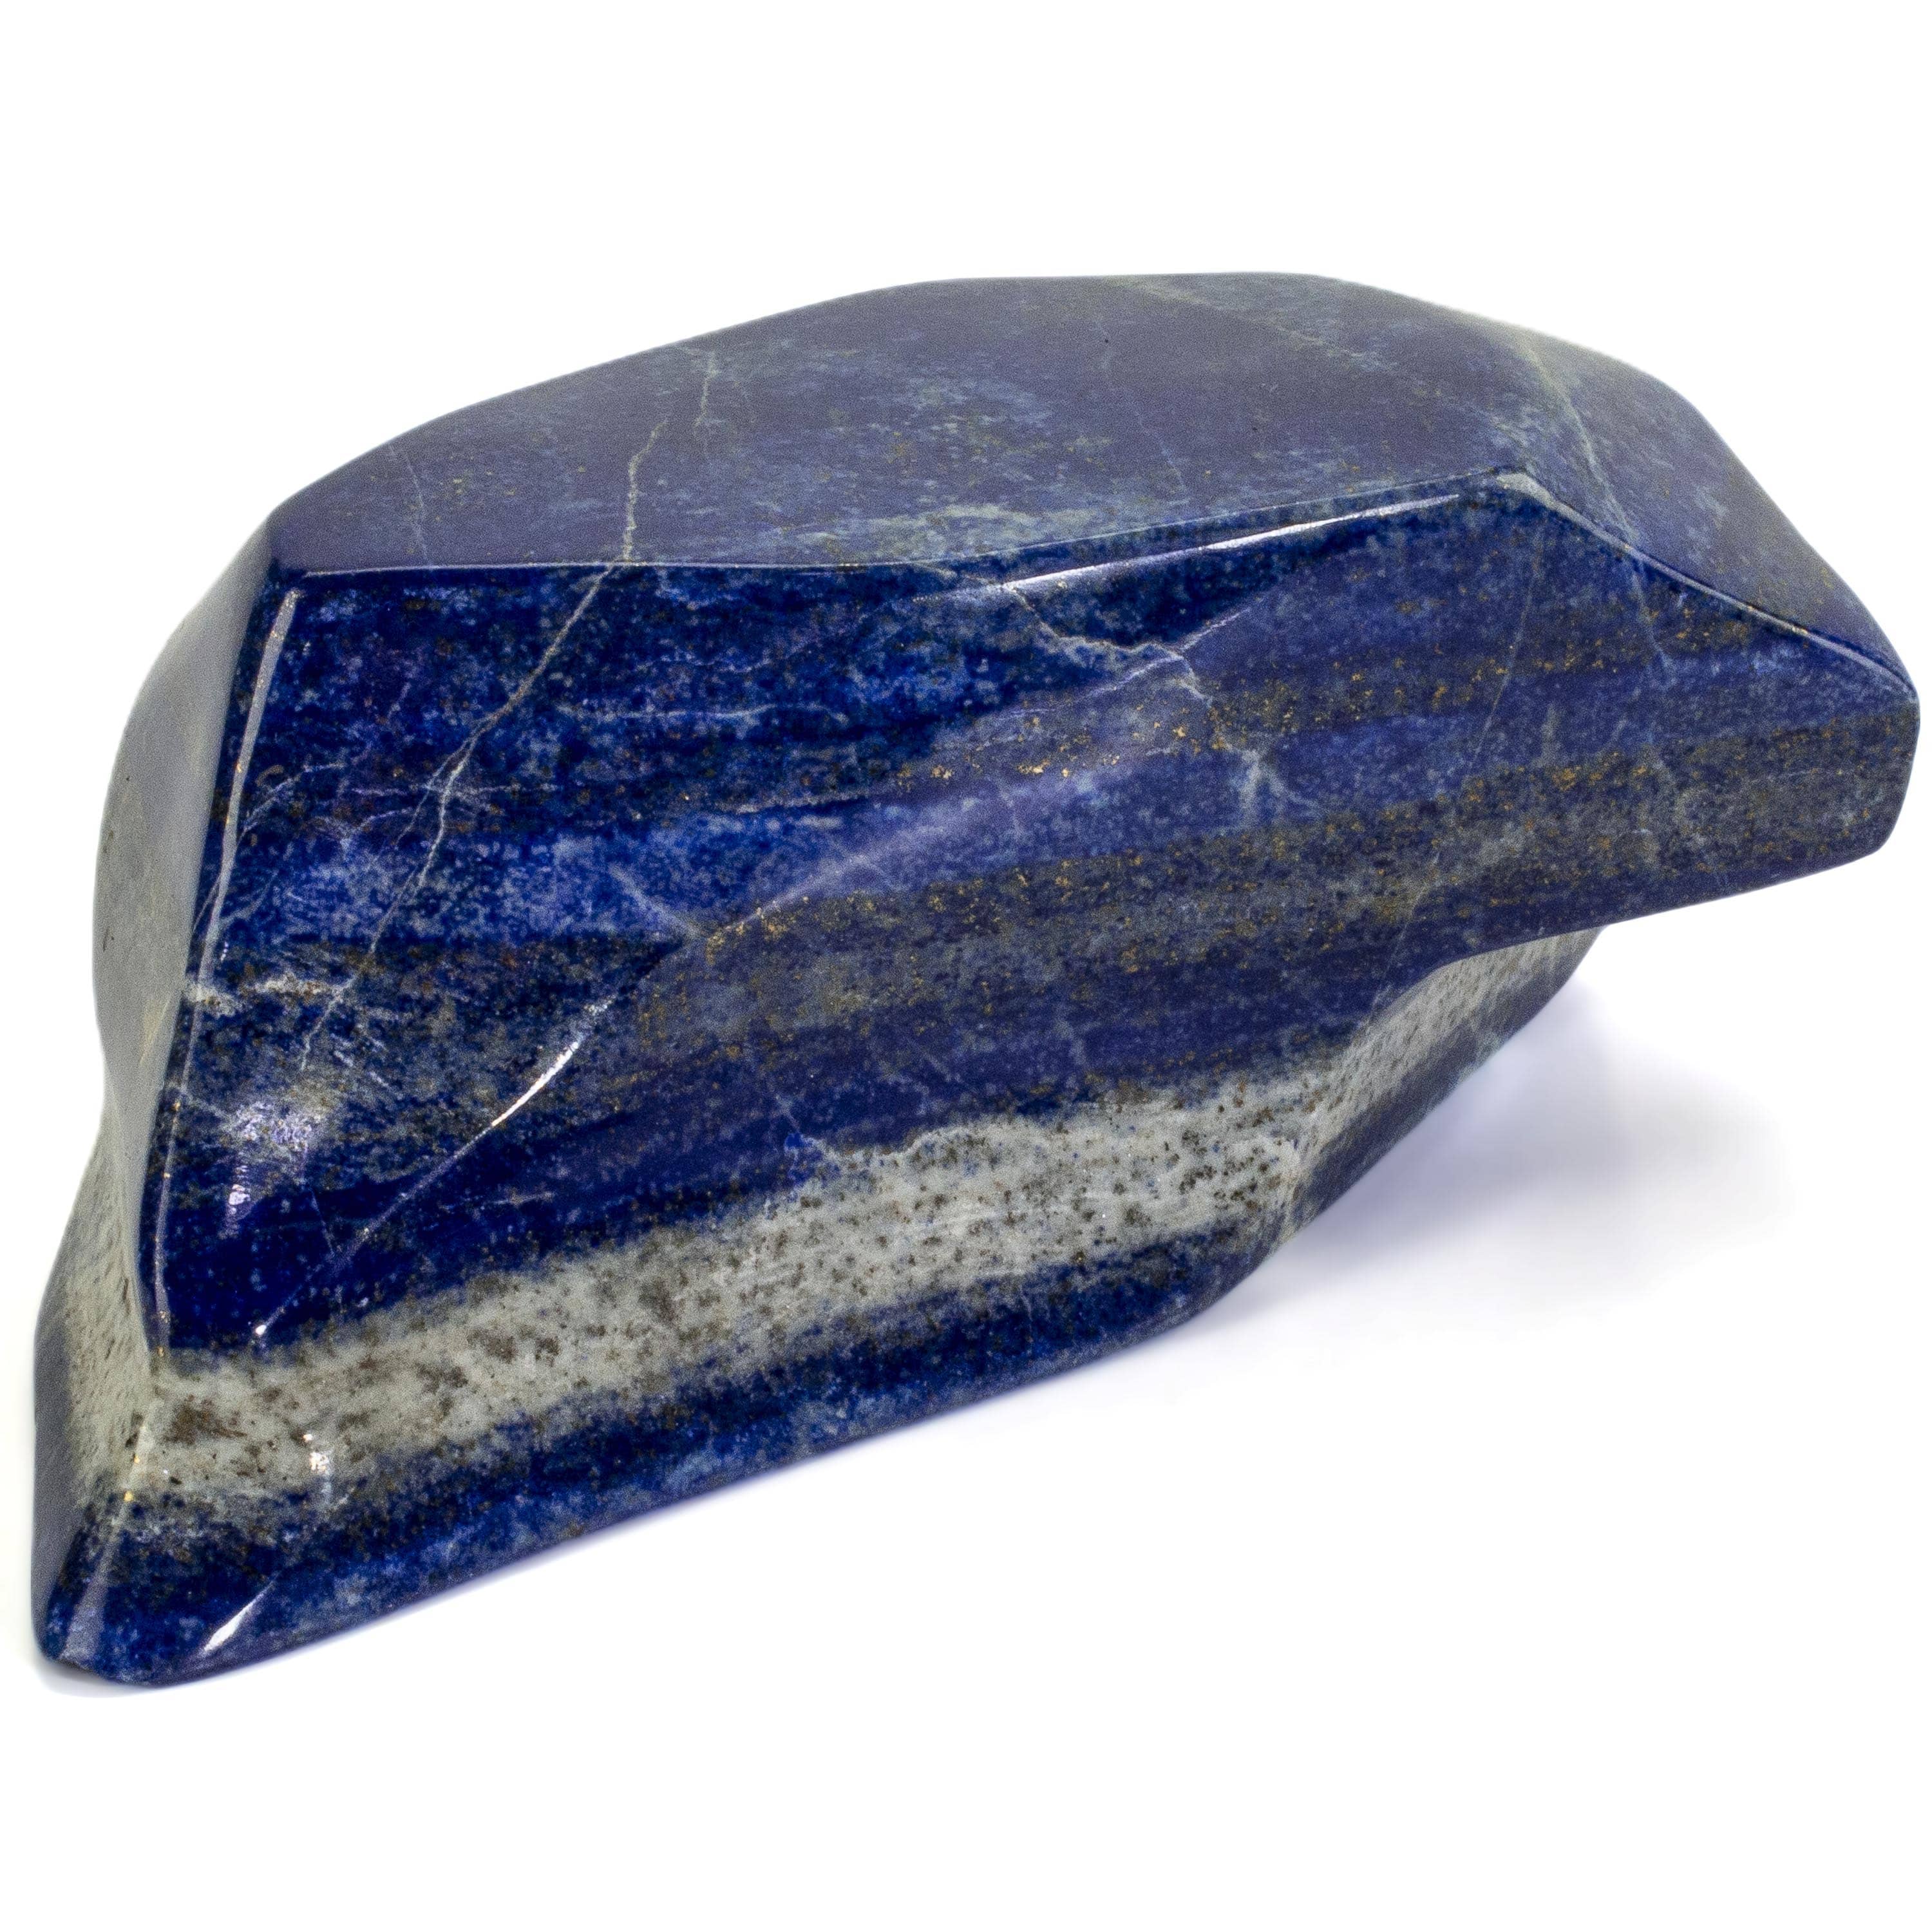 Kalifano Lapis Lapis Lazuil Freeform from Afghanistan - 1.3 kg / 2.8 lbs LP1400.004